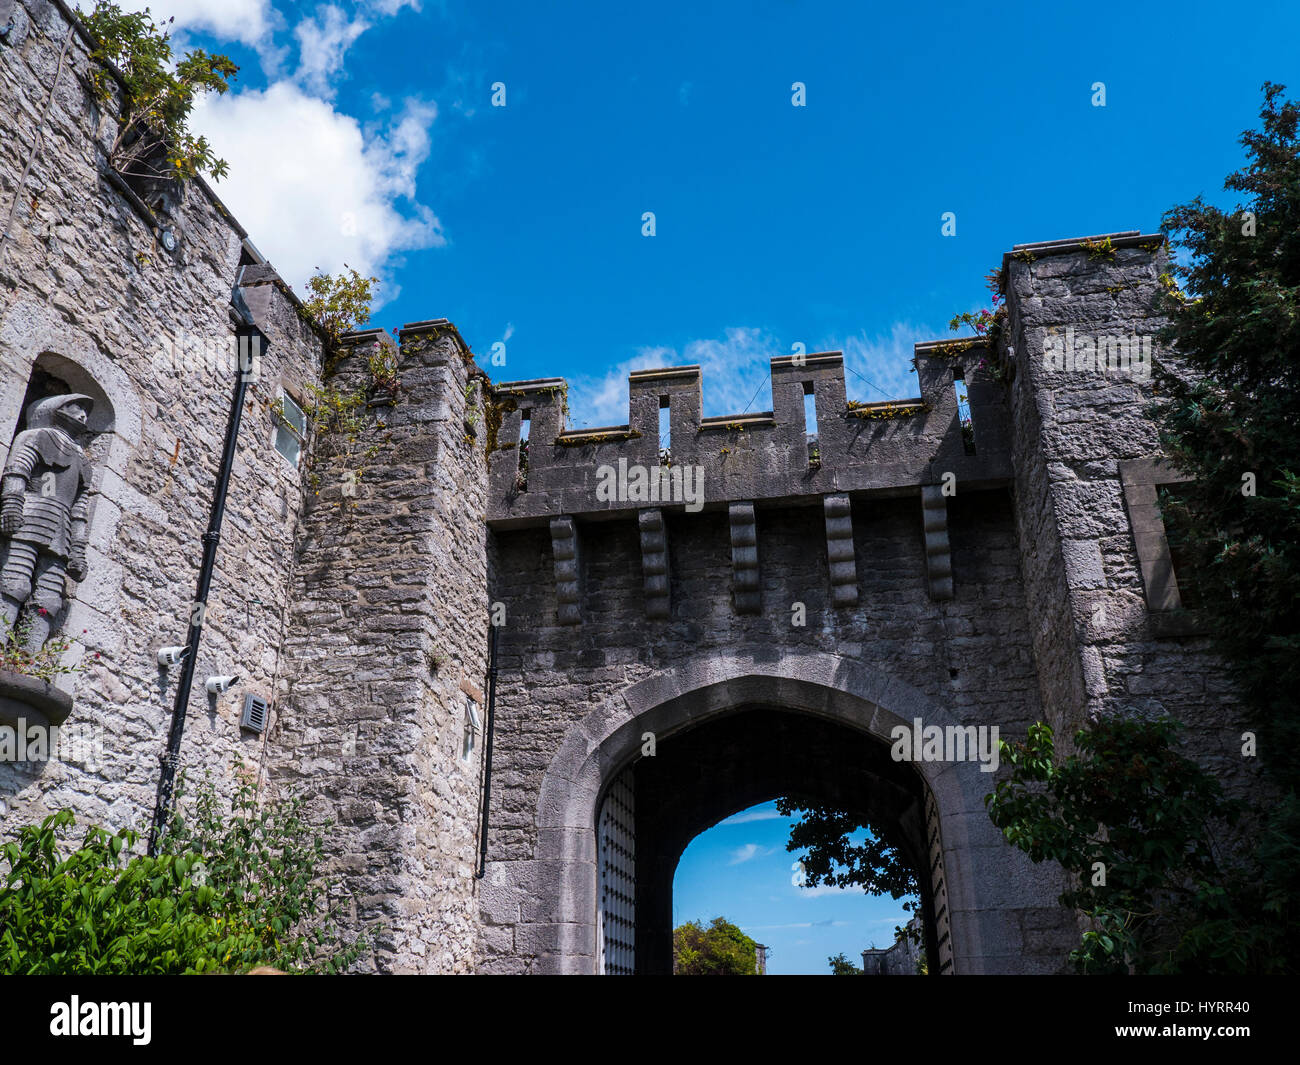 The beautiful castle and Gardens of Bodelwyddan Castle in North Wales ...